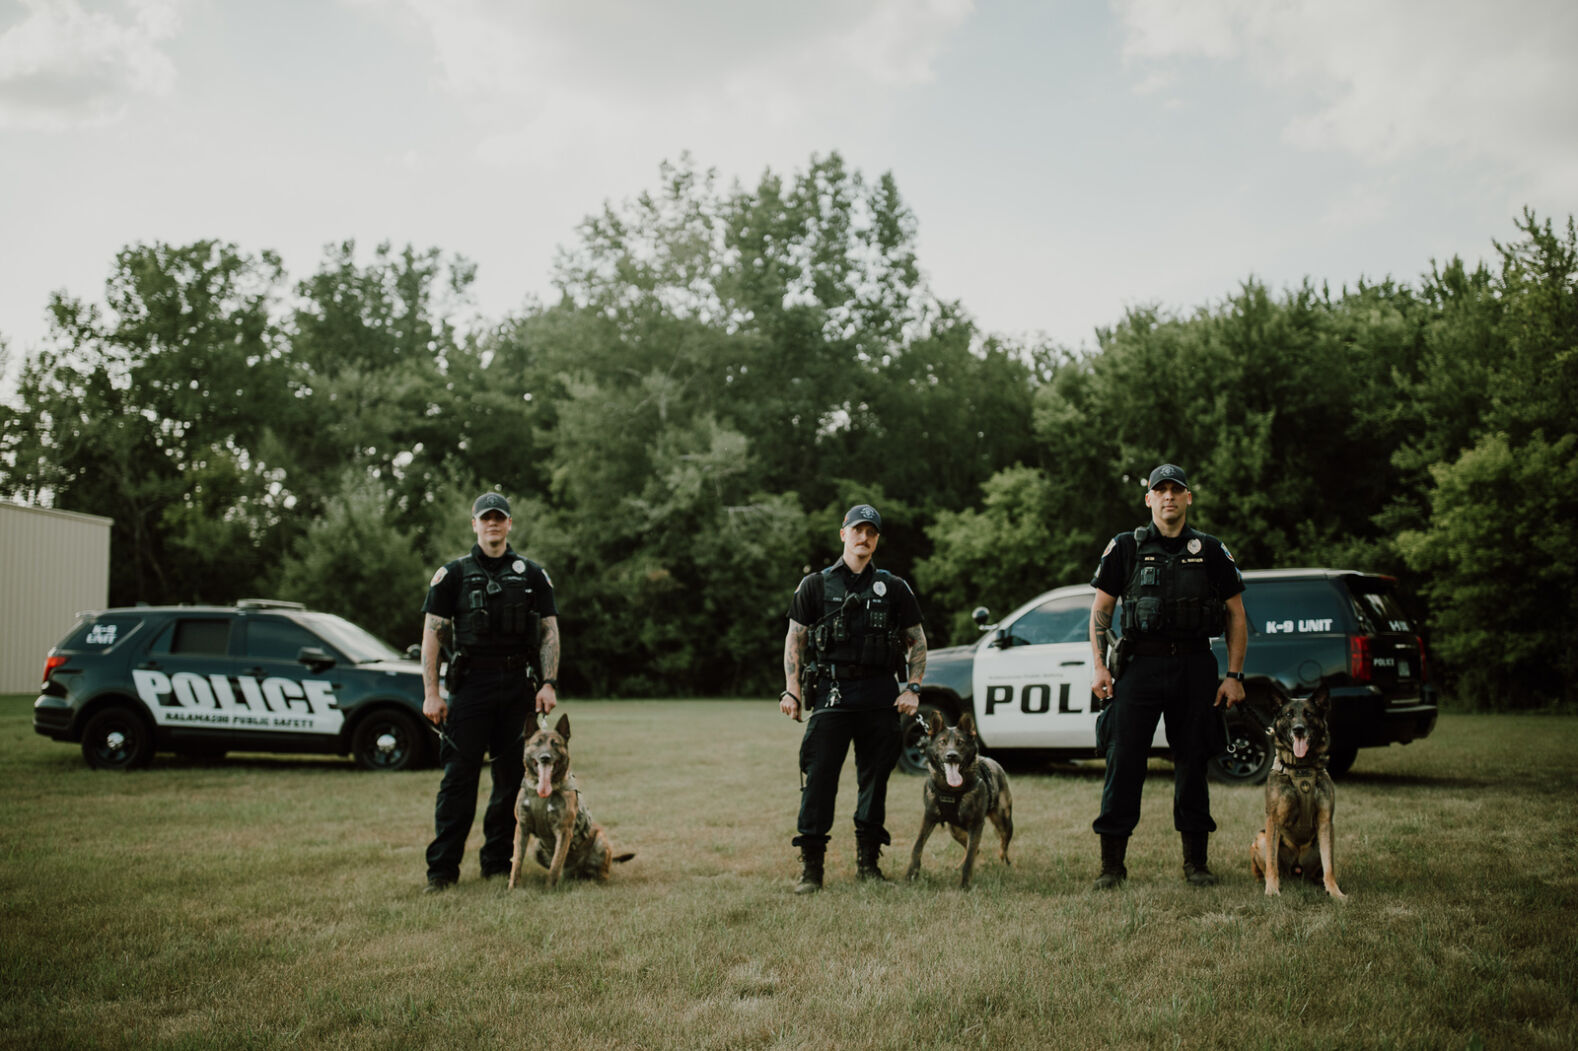 Three Public Safety Officers pose with police canines